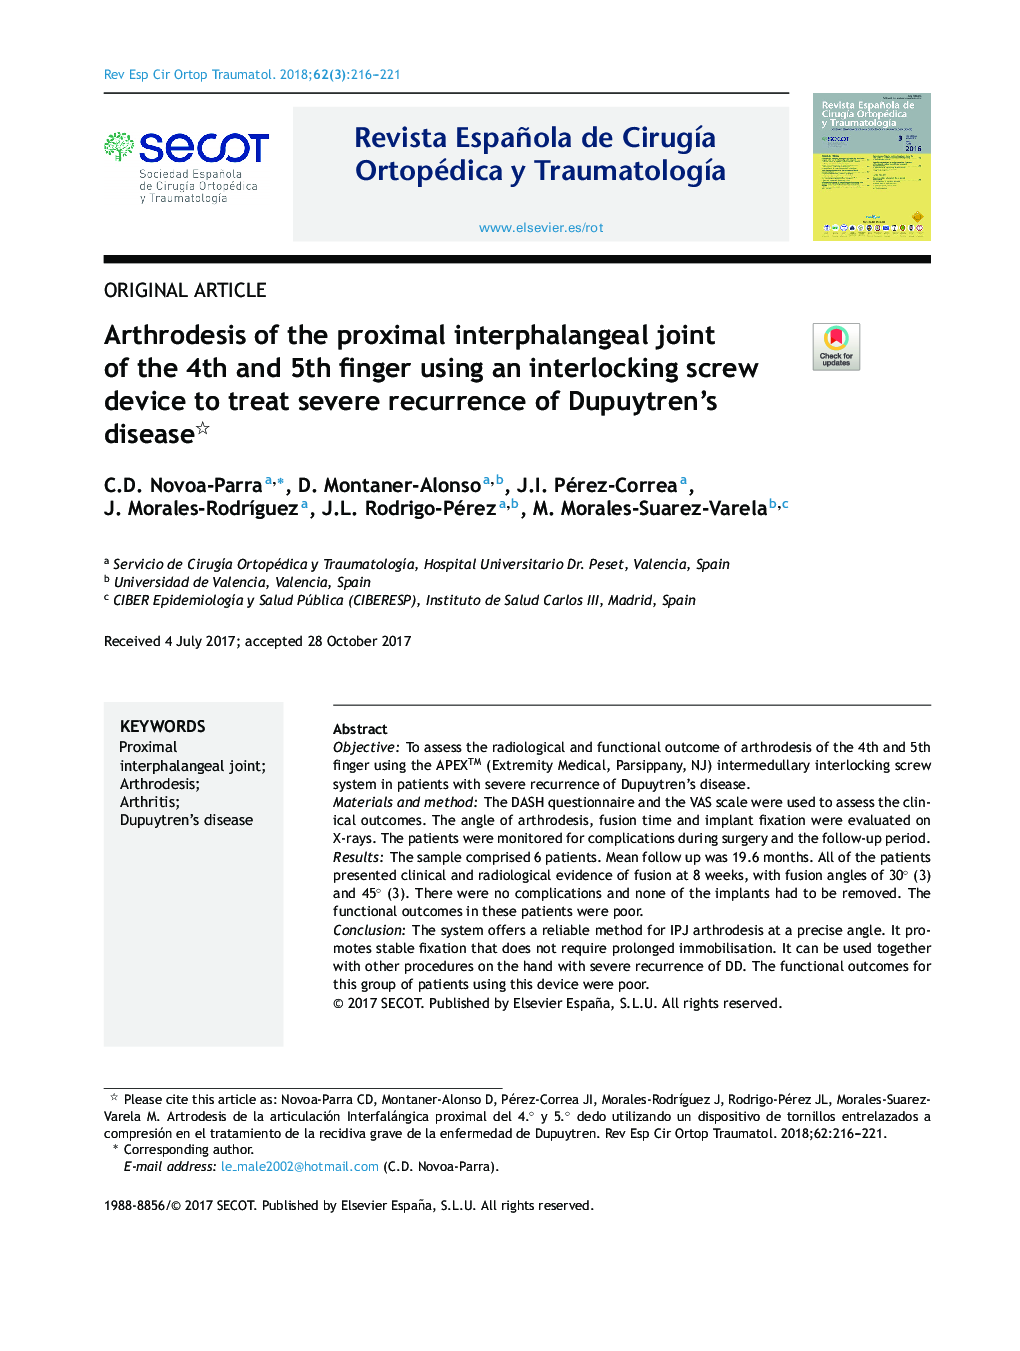 Arthrodesis of the proximal interphalangeal joint of the 4th and 5th finger using an interlocking screw device to treat severe recurrence of Dupuytren's disease